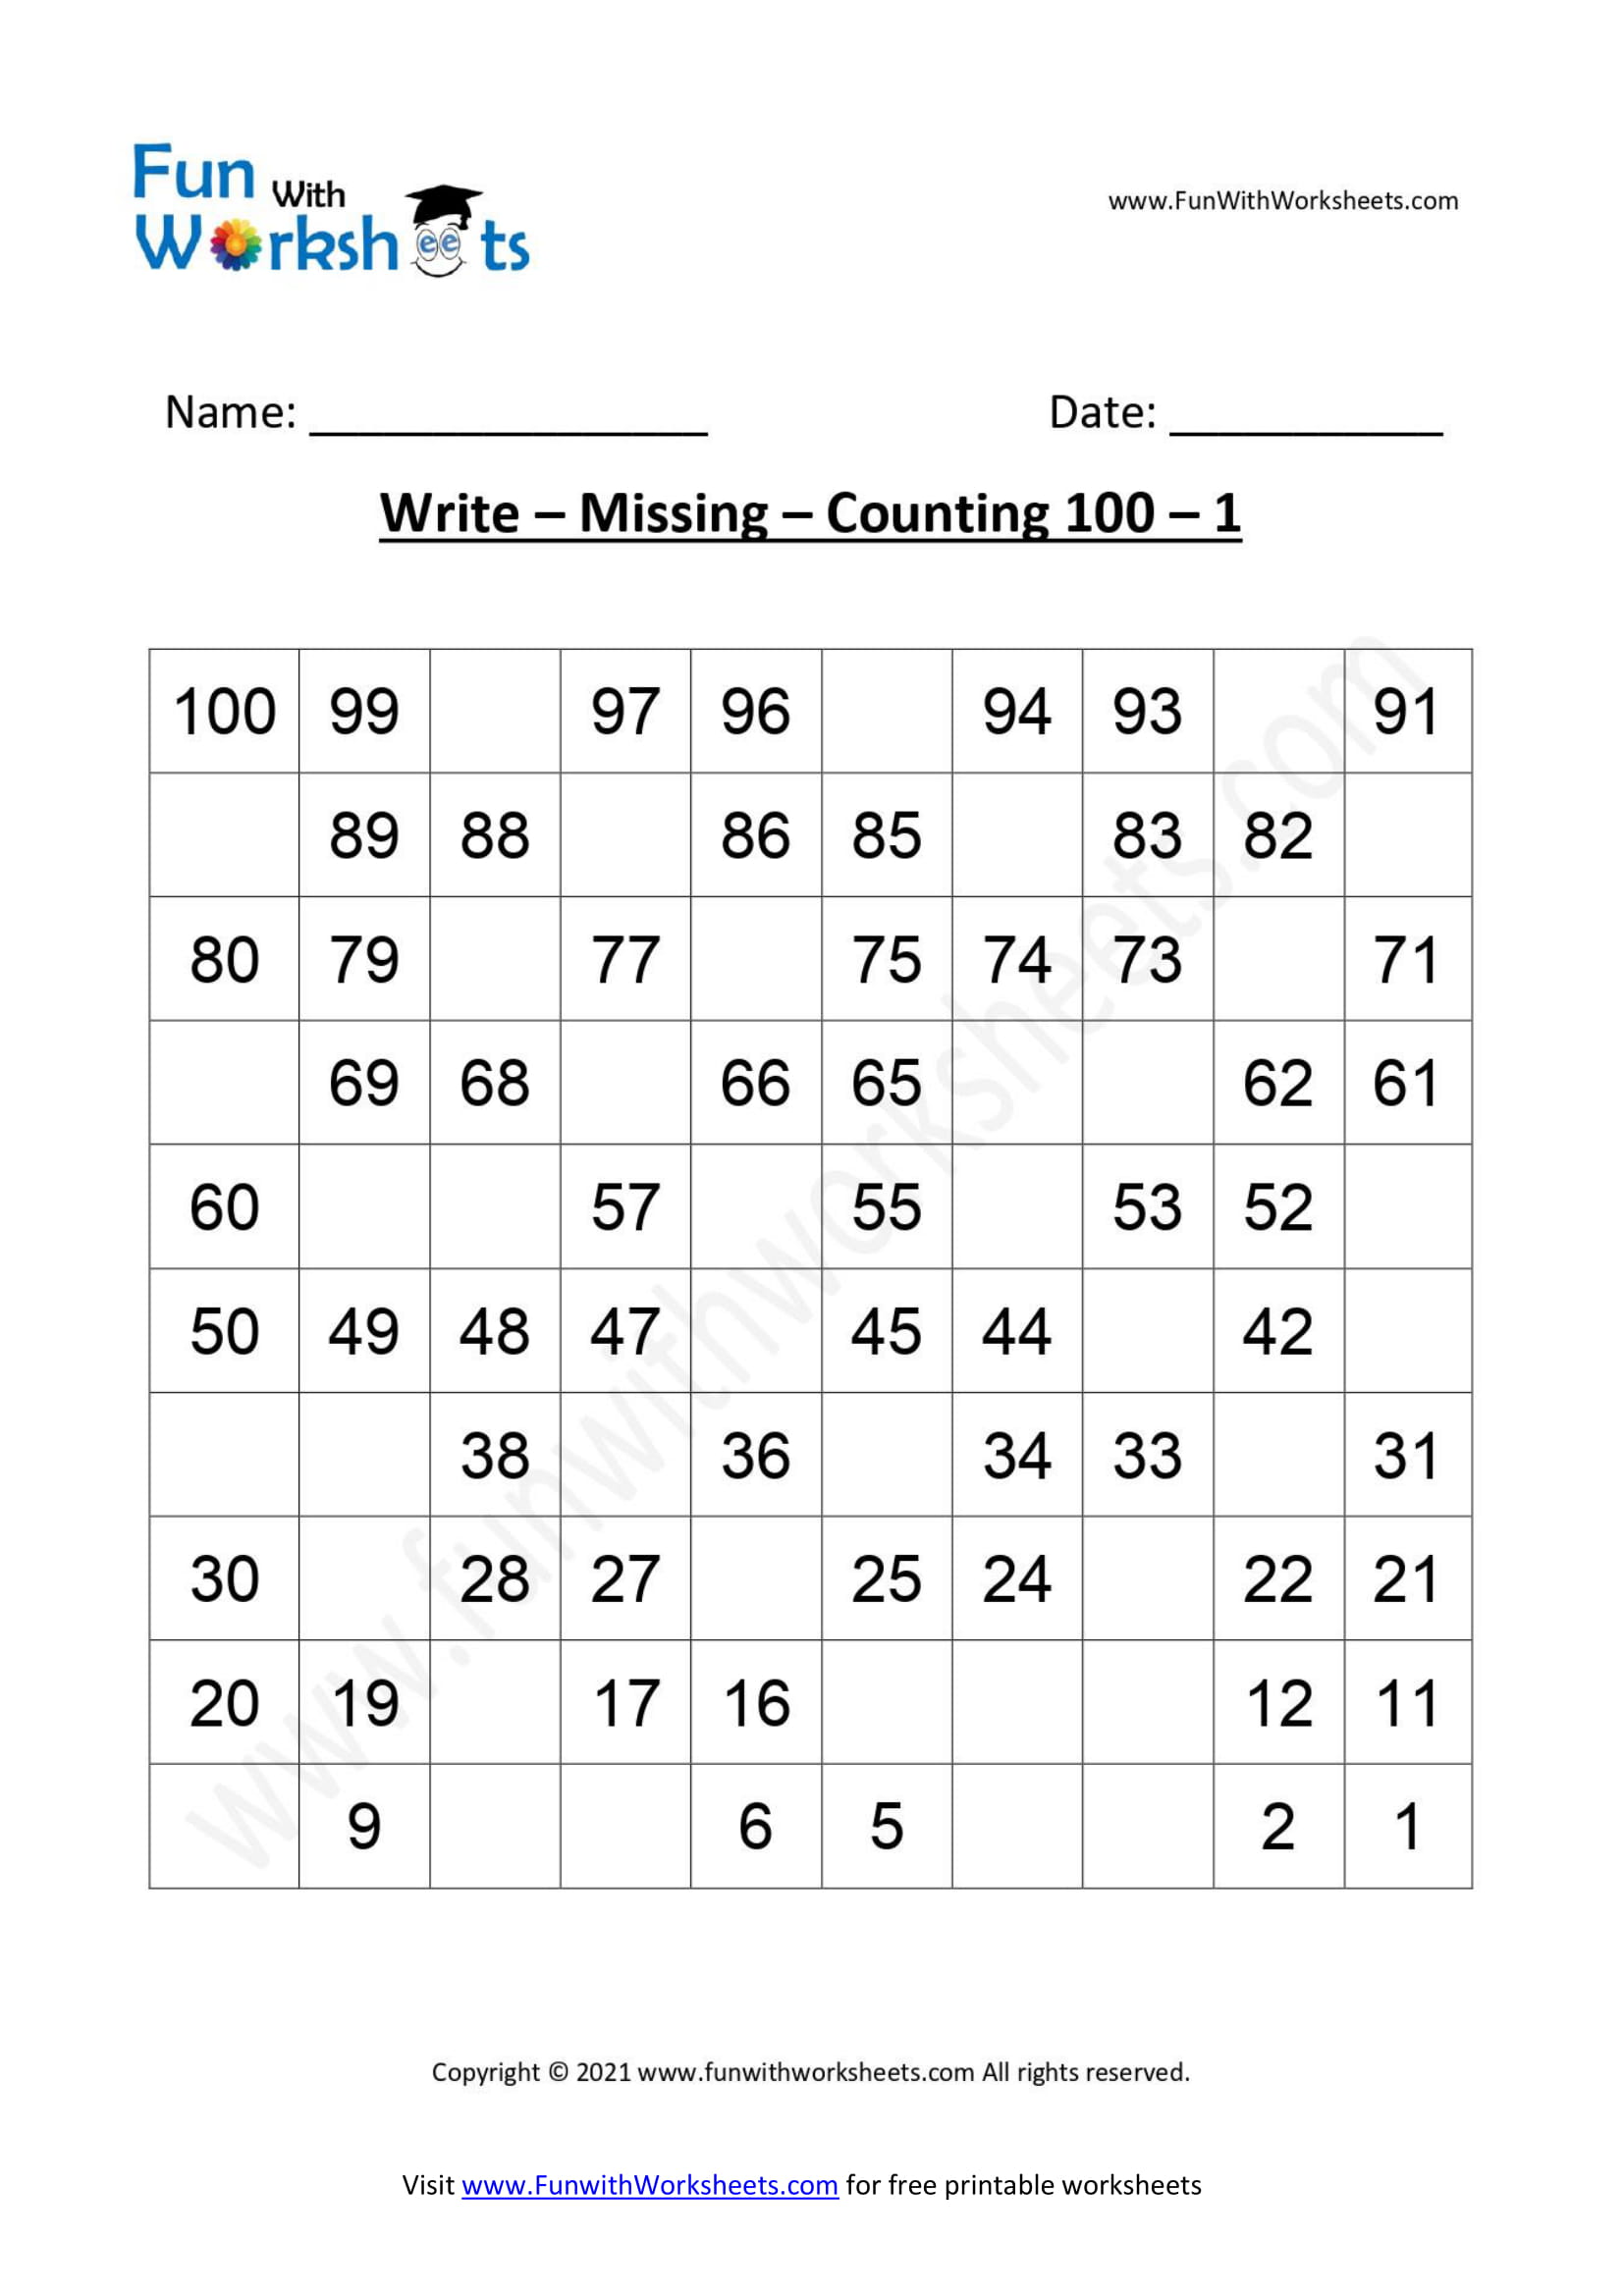 Free Printable Worksheets complete Reverse Counting Archives Page 2 Of 3 FUN With Worksheets